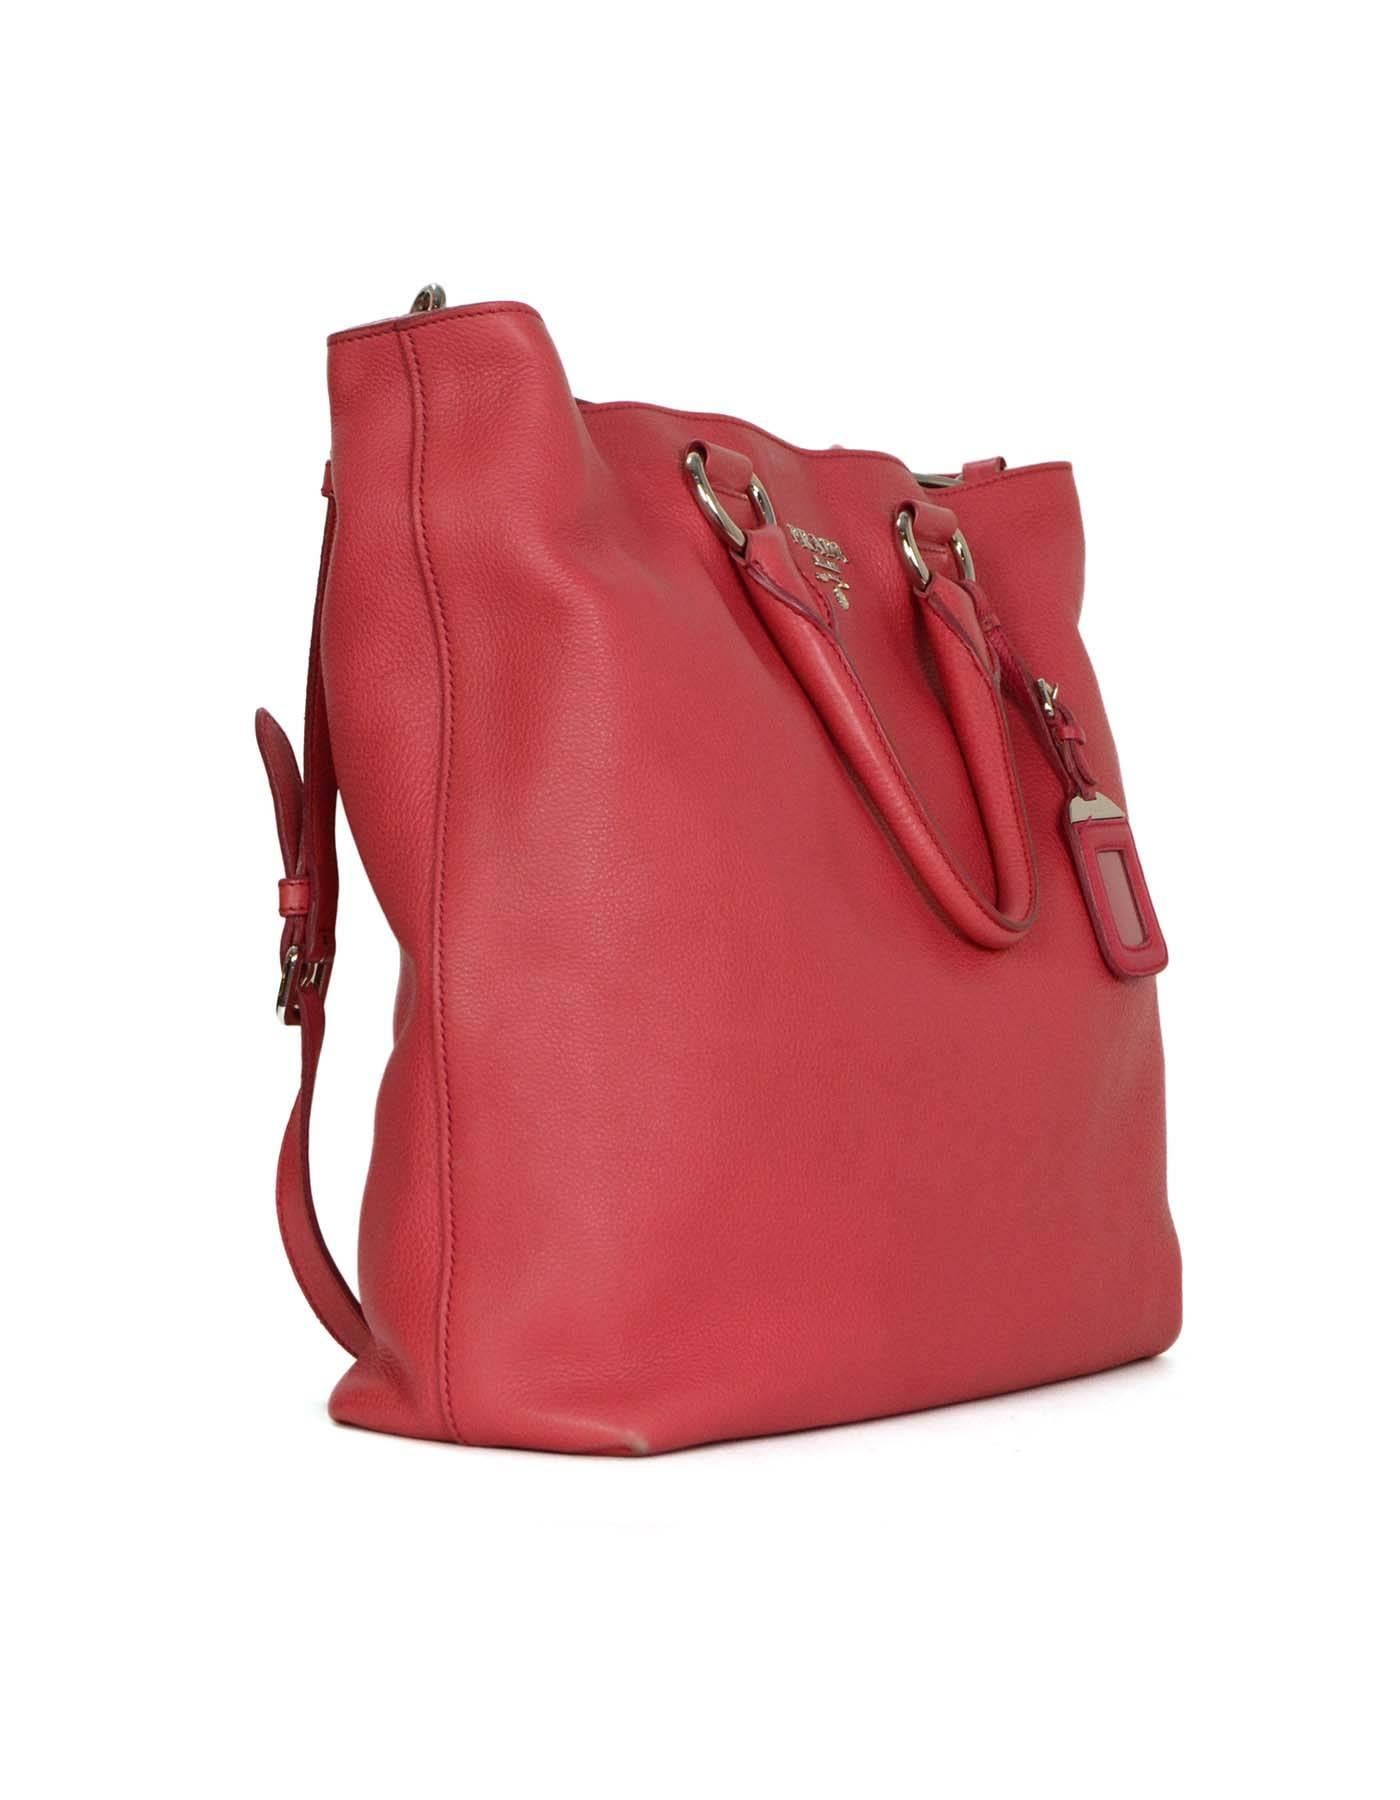 Prada Hot Pink Calfskin Leather Tote SHW
Features silver hardware Prada logo detail at front and optional shoulder strap

Made In: Italy
Color: Hot pink
Hardware: Silvertone
Materials: Leather
Lining: Hot pink textile
Closure/Opening: Open